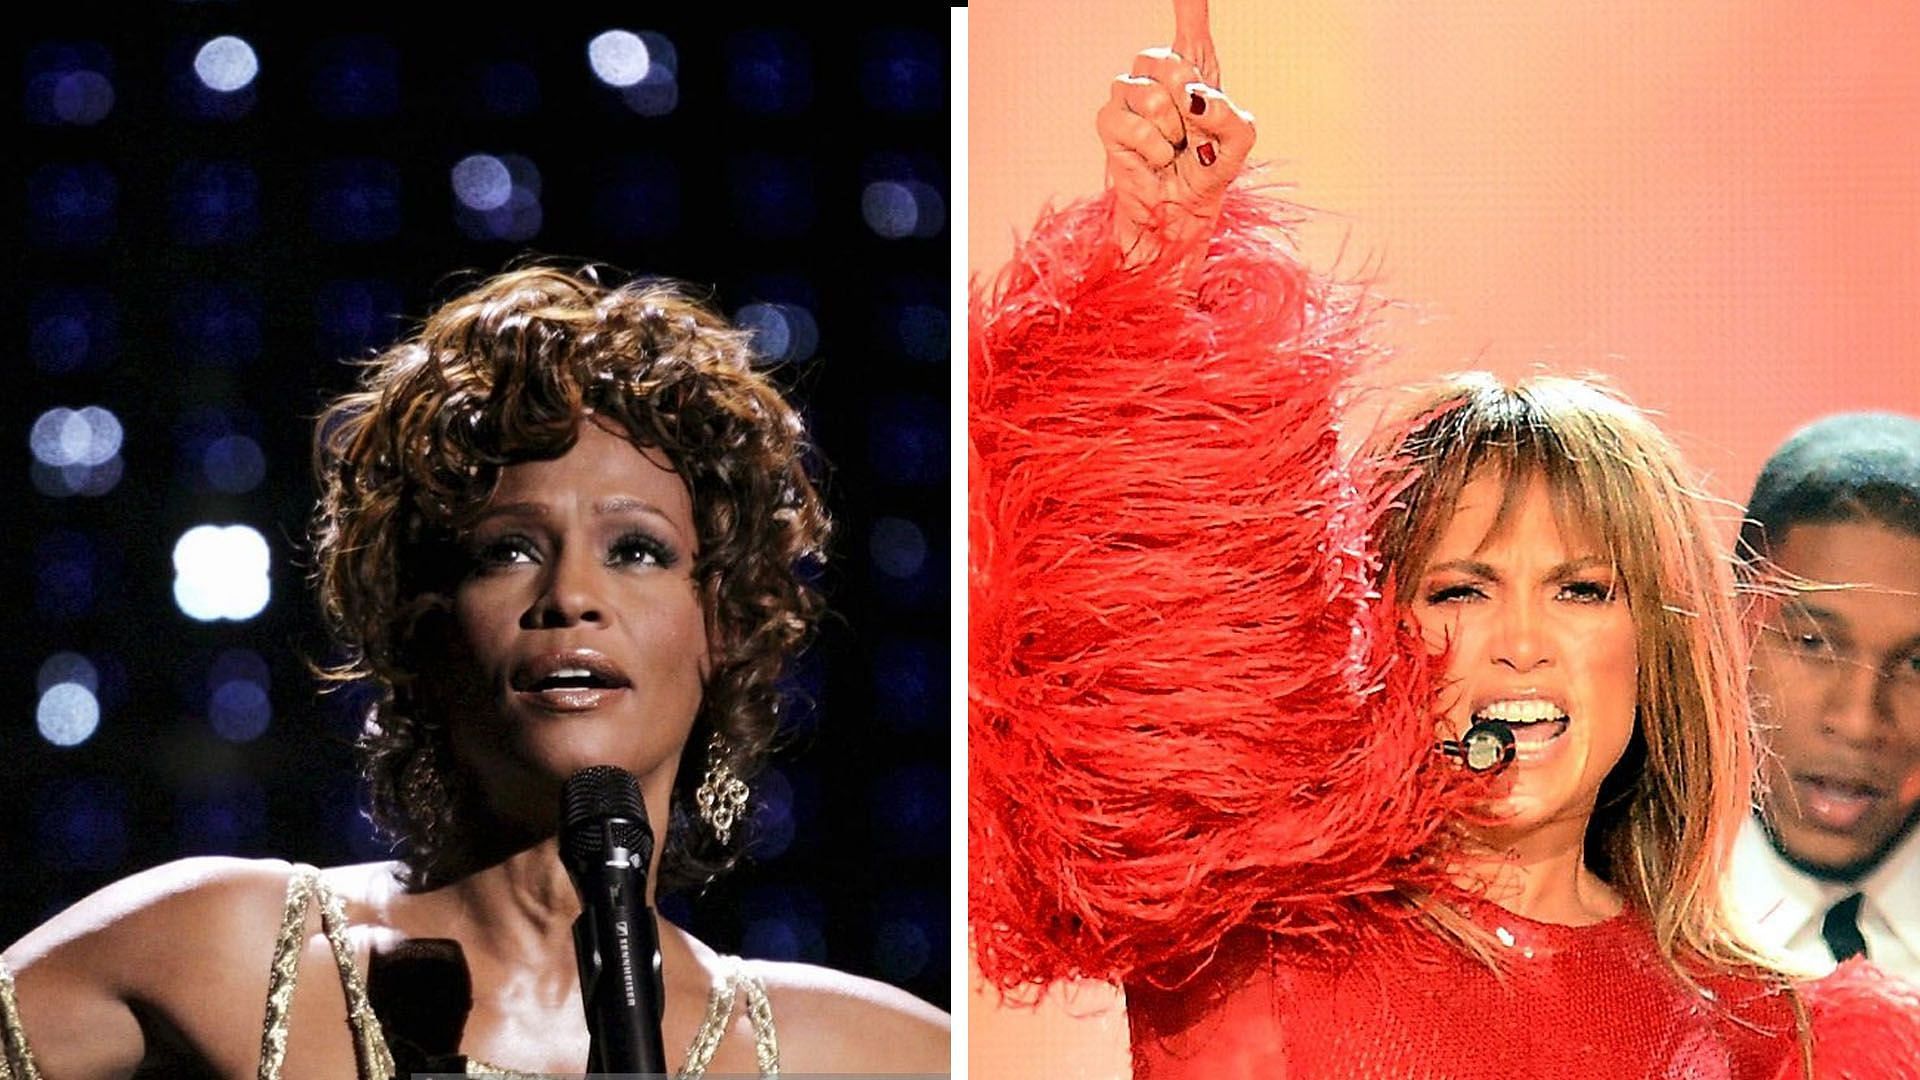 Rumors that Jennifer Lopez will pay a tribute to Whitney Houston are false (image via Getty Images)